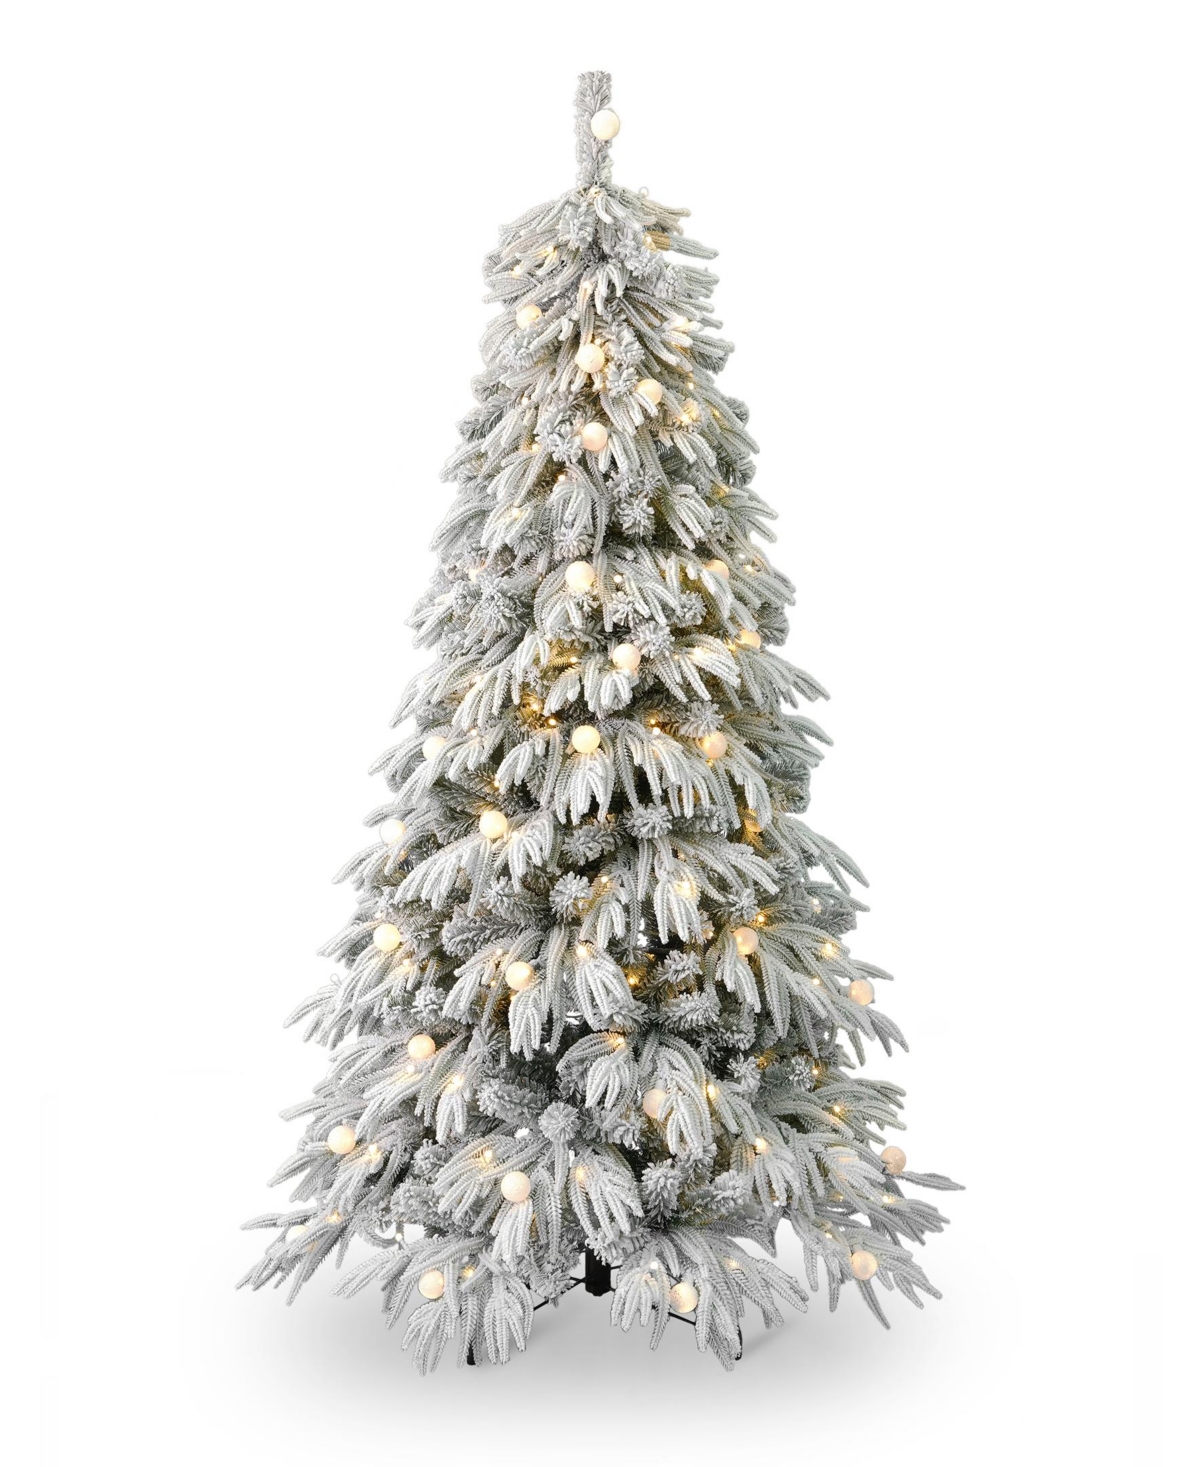 Frosted Acadia 6.5' Pre-Lit Flocked Pe Mixed Pvc Full Tree with Metal Stand, 2409 Tips, 300 Changing Led Lights - White